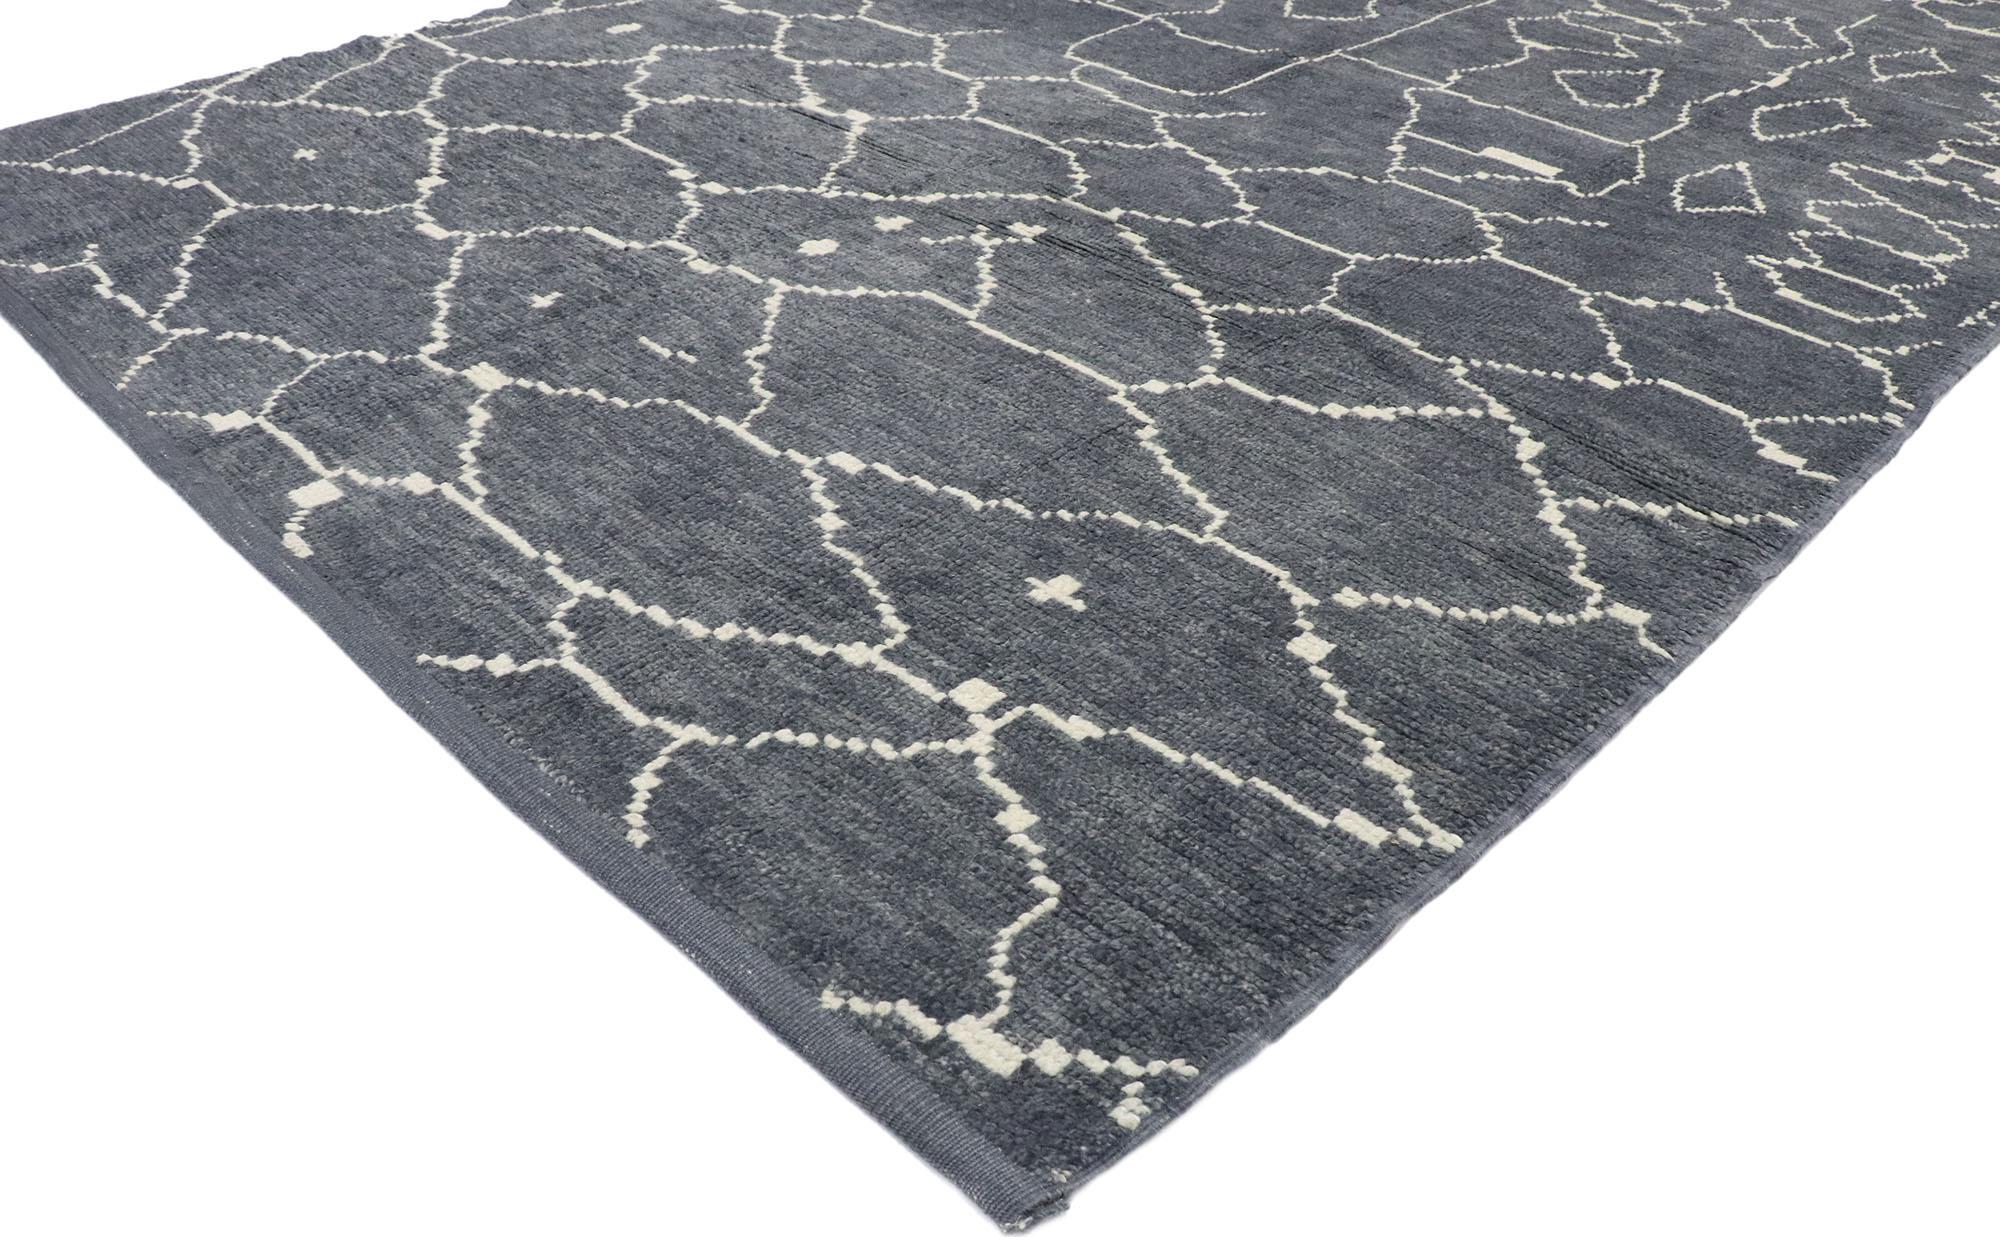 53443, new contemporary Moroccan style rug with Tribal design. With its modern tribal style, incredible detail and texture, this hand knotted wool contemporary Moroccan rug is a captivating vision of woven beauty and a joy to walk upon. The abrashed